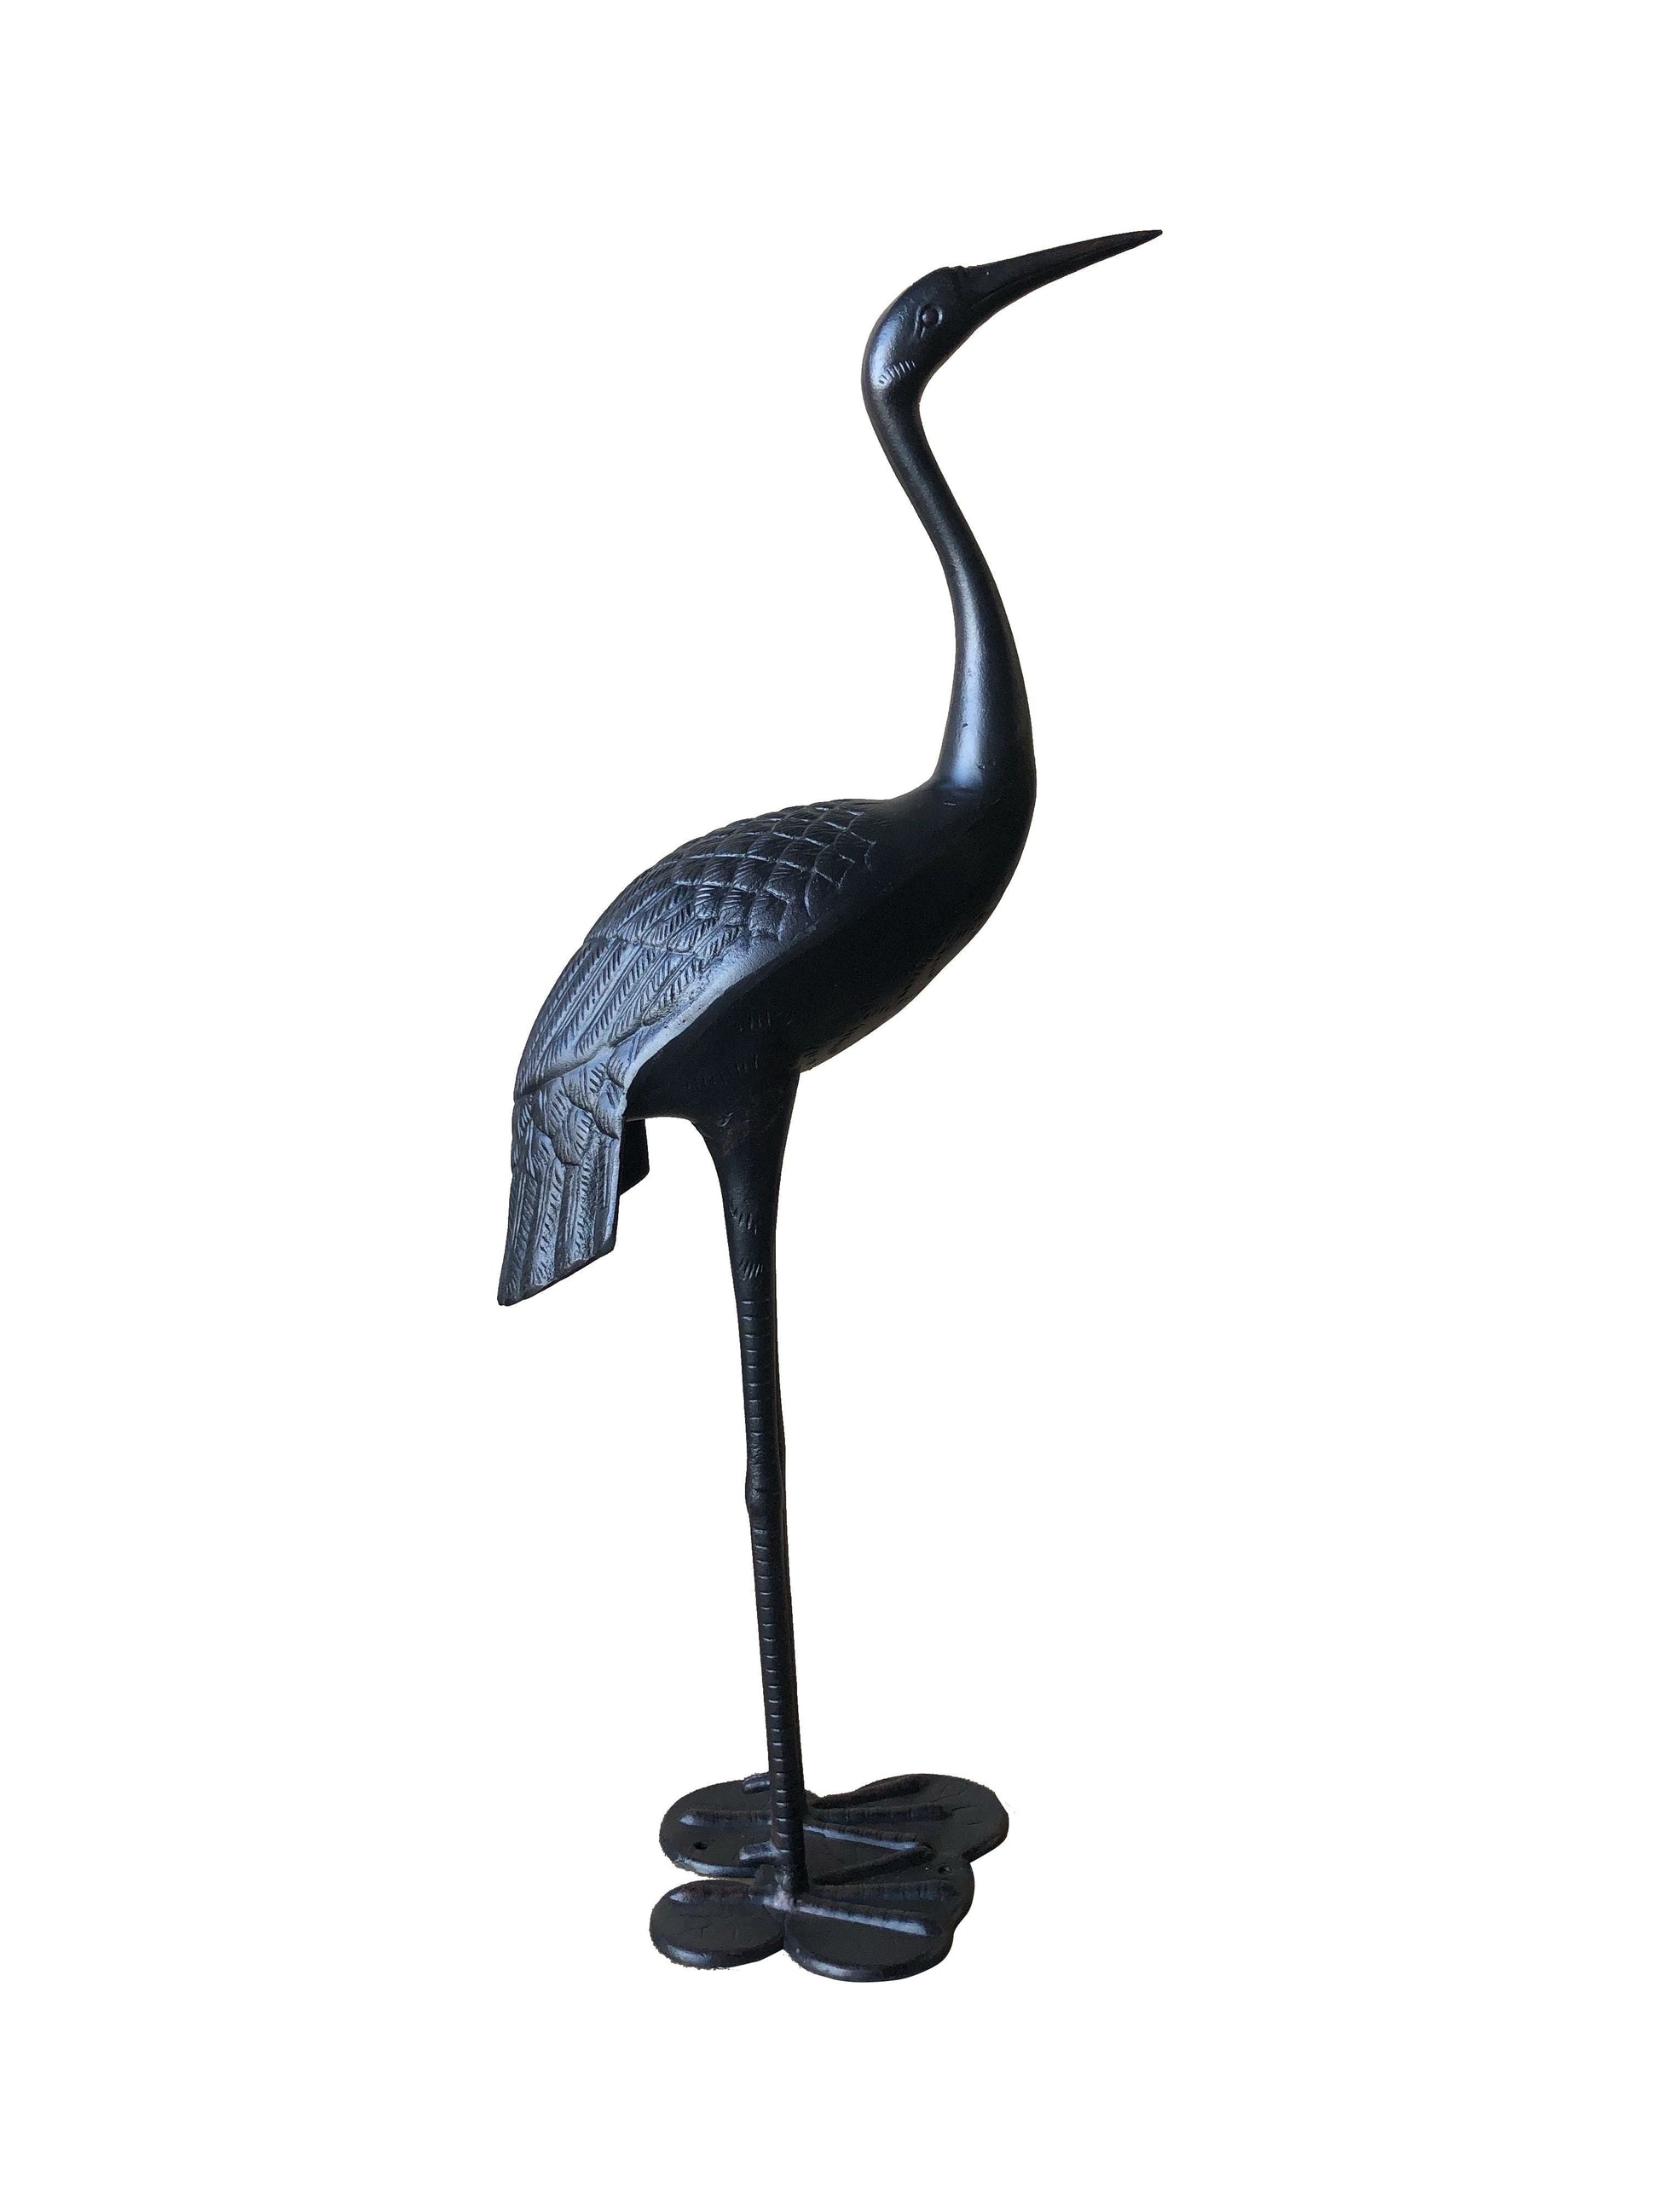 Niles and Frasier Cranes Statue  